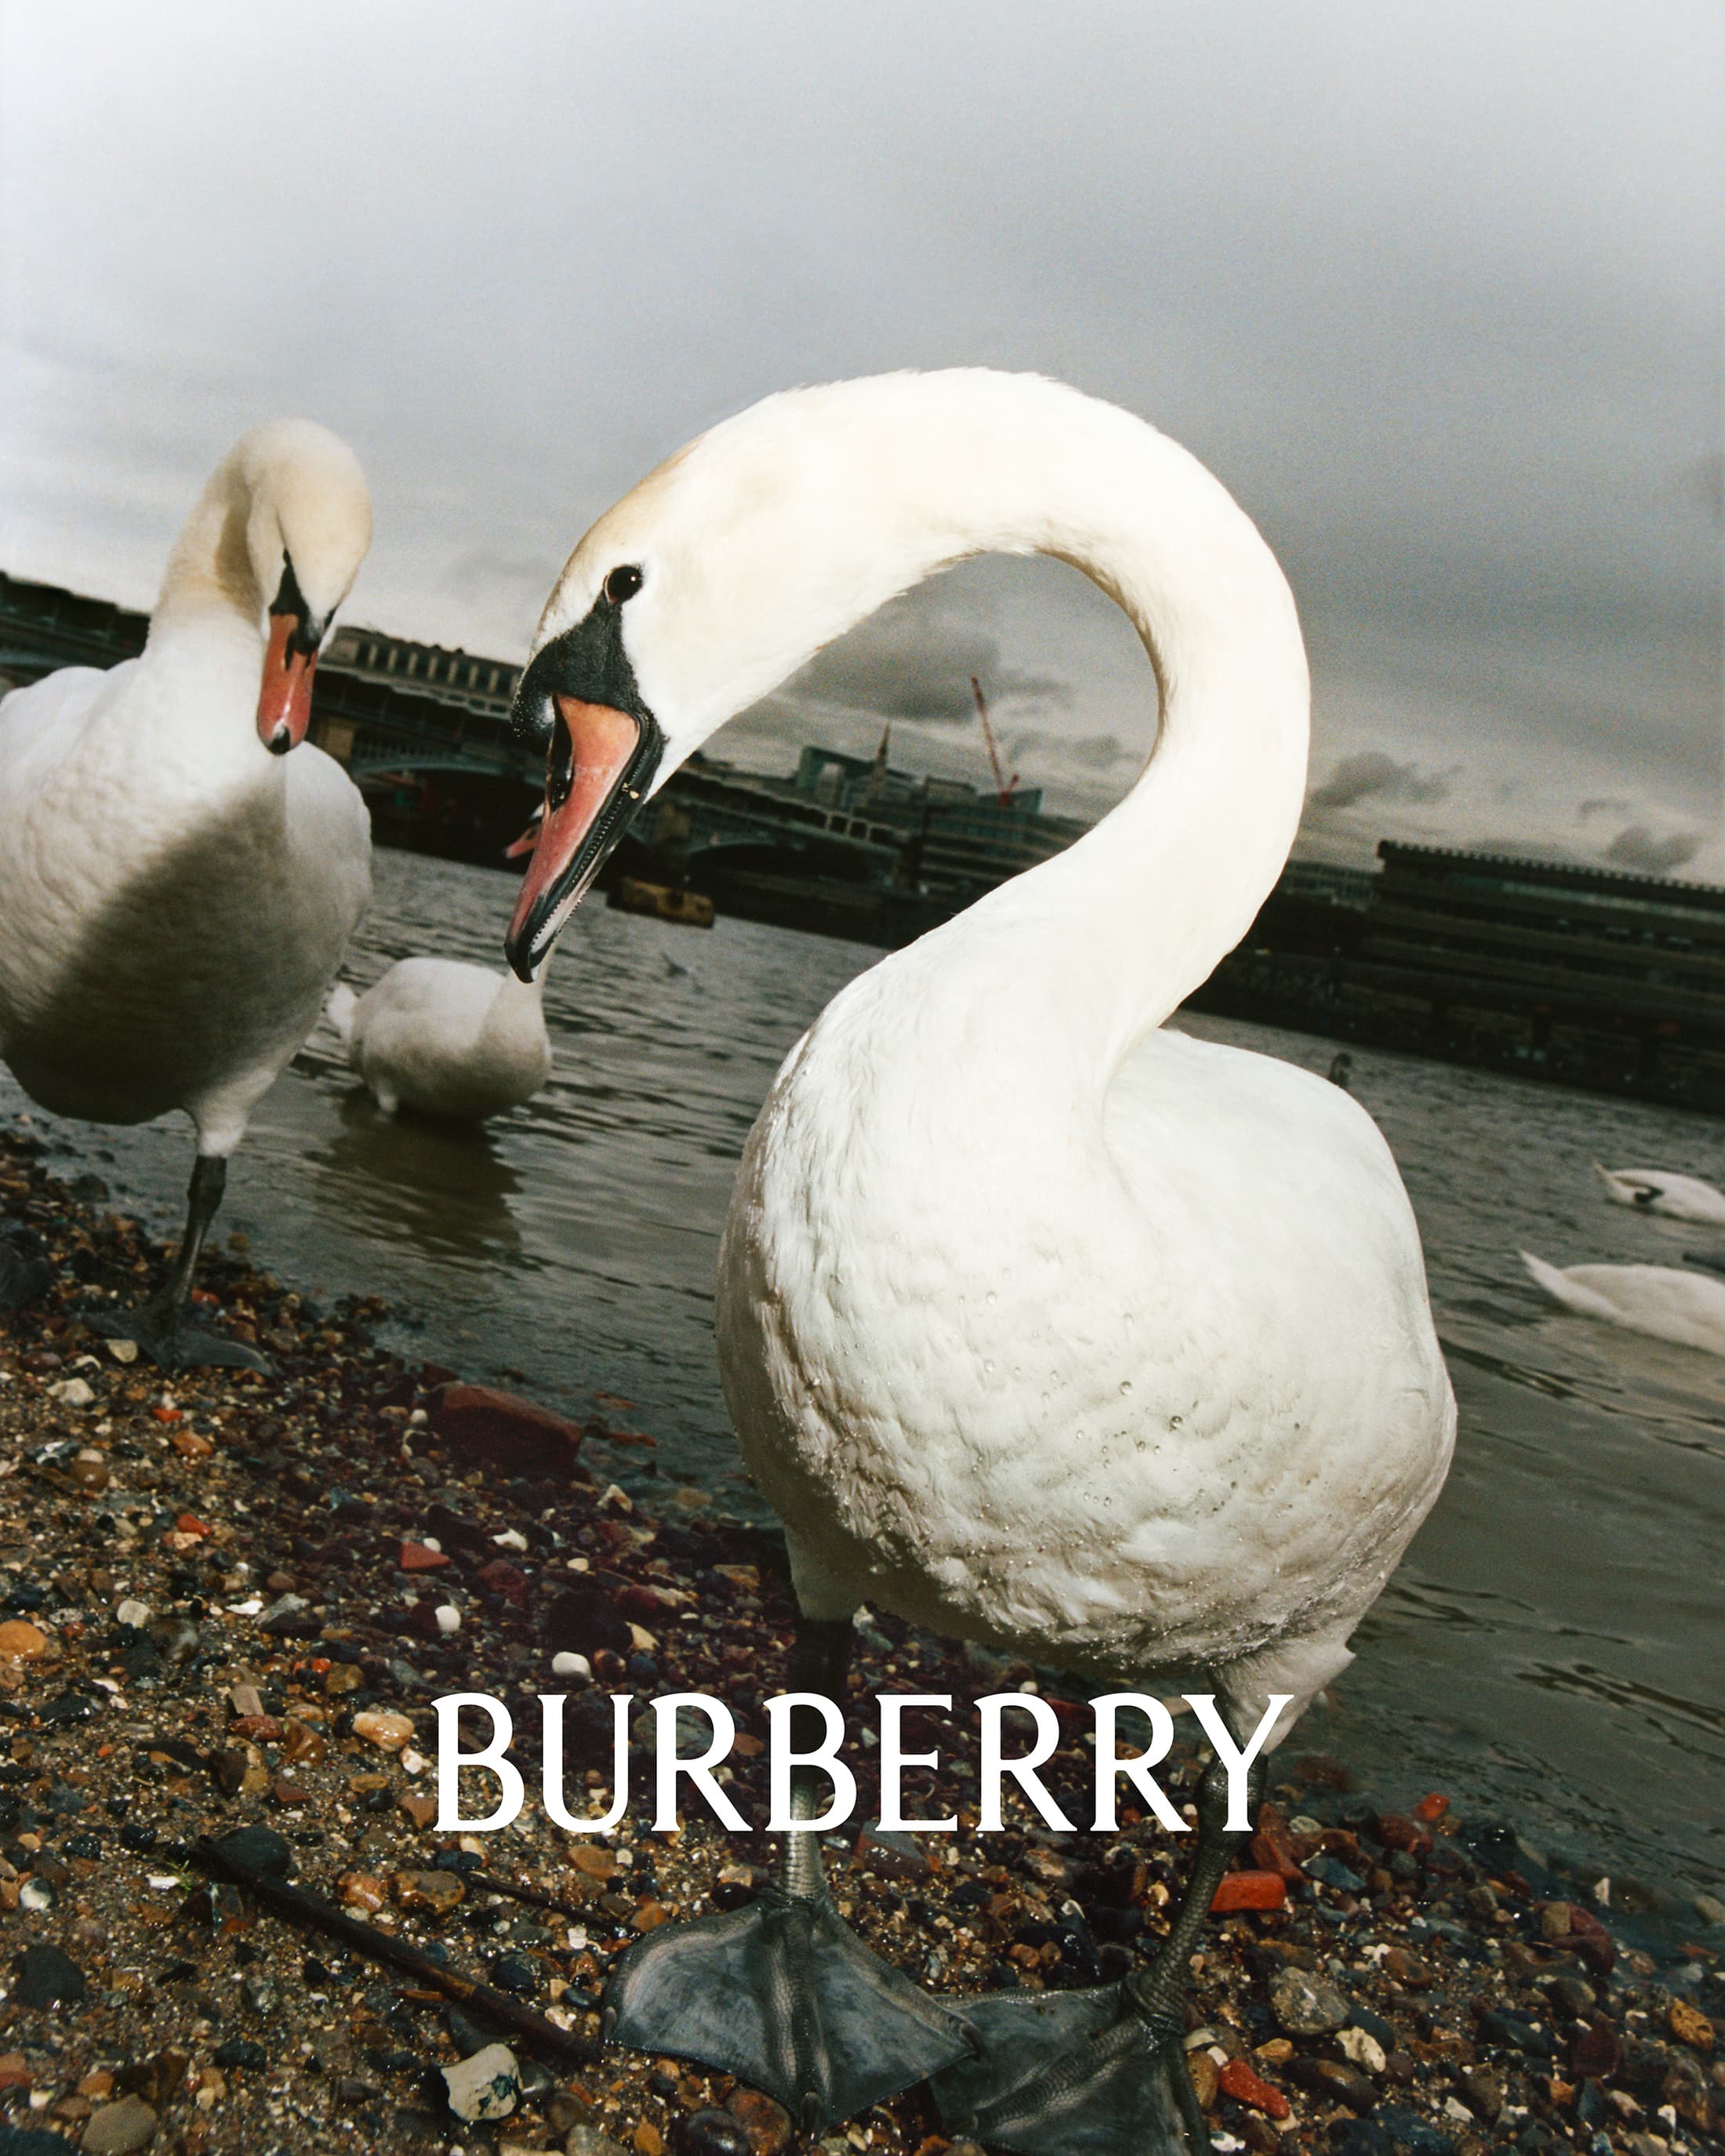 Burberry 2023 ad campaign photo by Tyrone Lebon and Daniel Lee